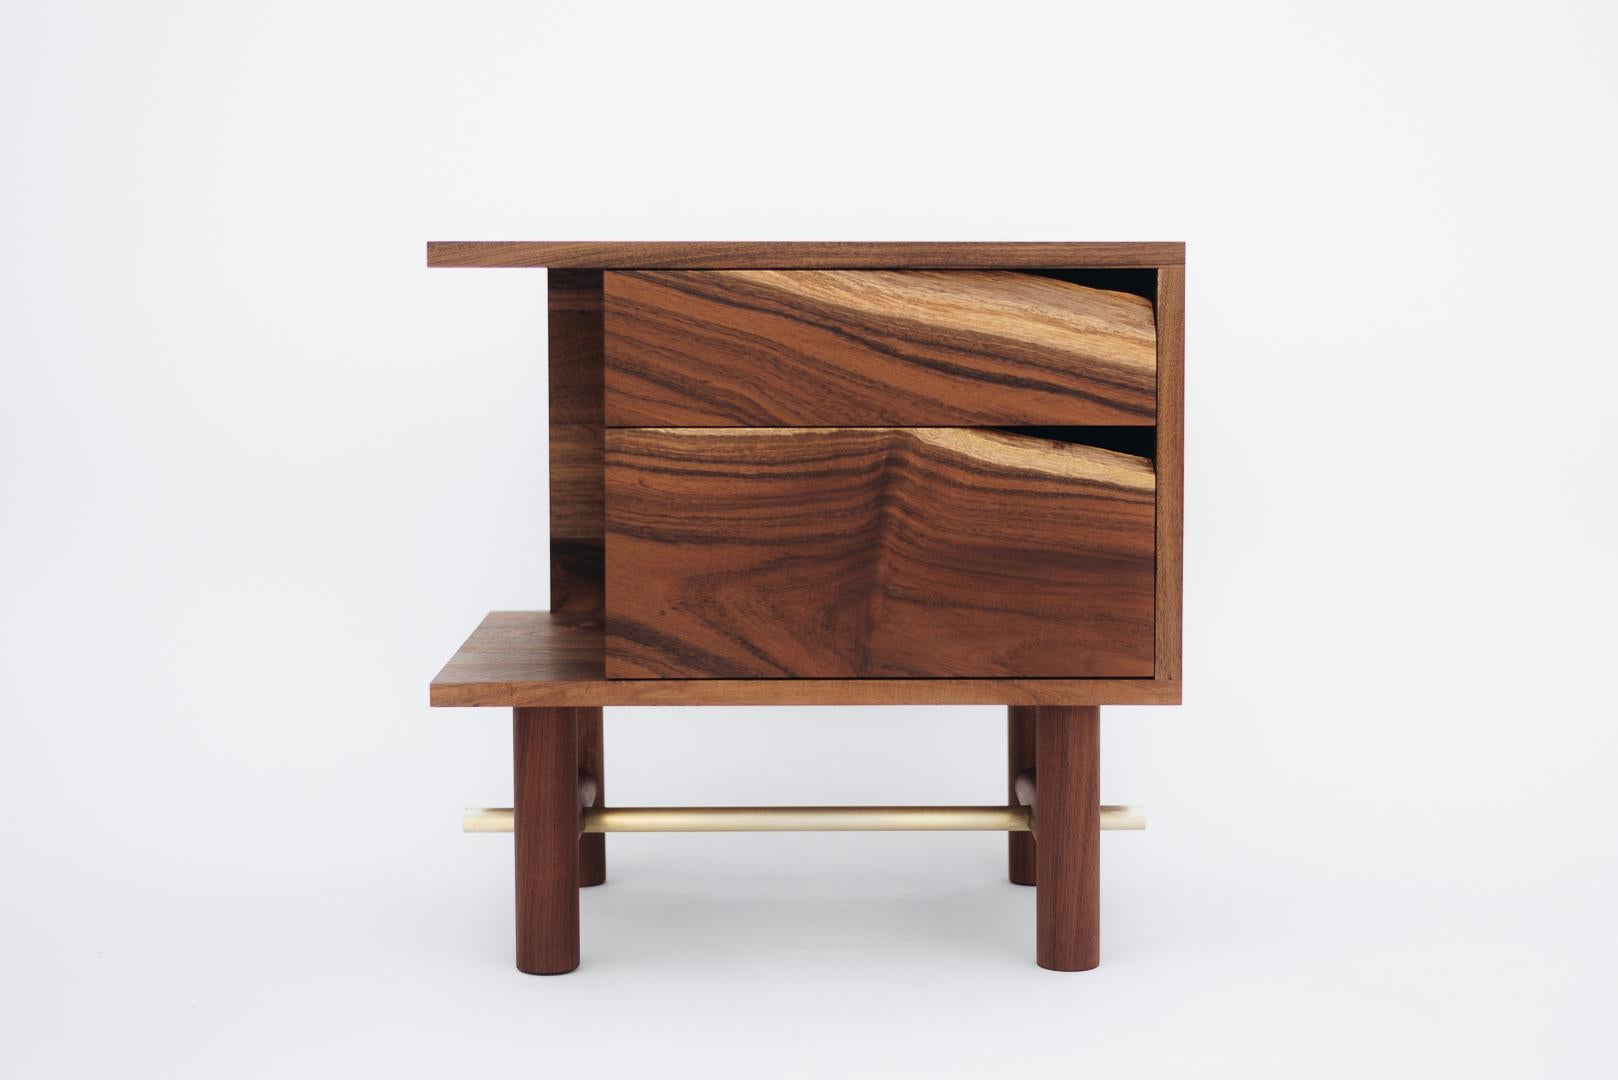 The design of Ocum Nightstand is typified by the search for balanced proportions, simplicity of the basic forms and minimalist construction. The contrasting textures of the Caribbean walnut and the bronze details give it lots of personality.